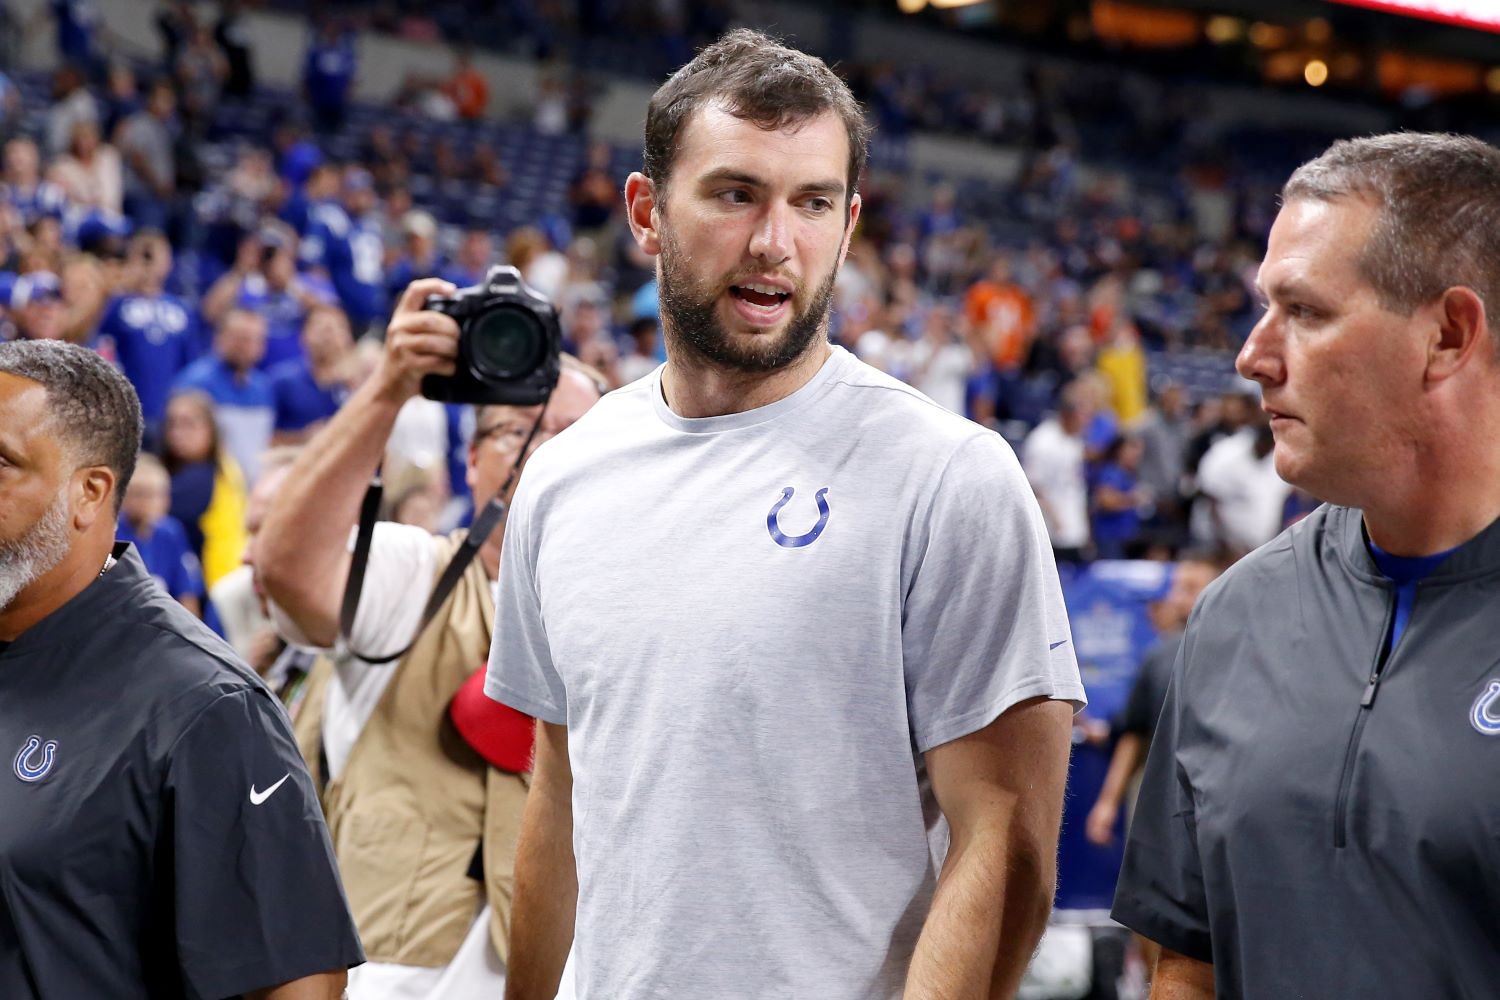 Jim Irsay Sends Stern Message to Colts Fans About Andrew Luck’s NFL Future